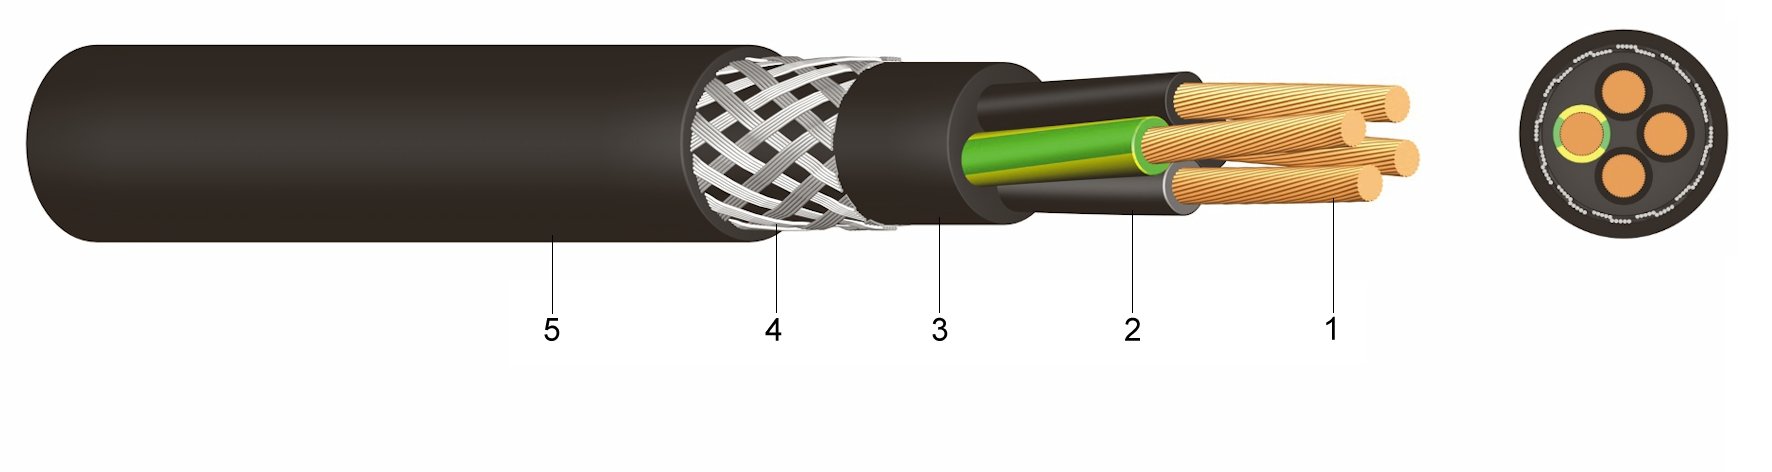 Control cable. Кабель YSLY-JZ 7x1.5. Кабель 0,6/1kv Cable. 3120000372 Кабель управления h05v-k 0.75 BN. Кабель f-CY-JZ (LIYCY-JZ) 4g1 (16372).